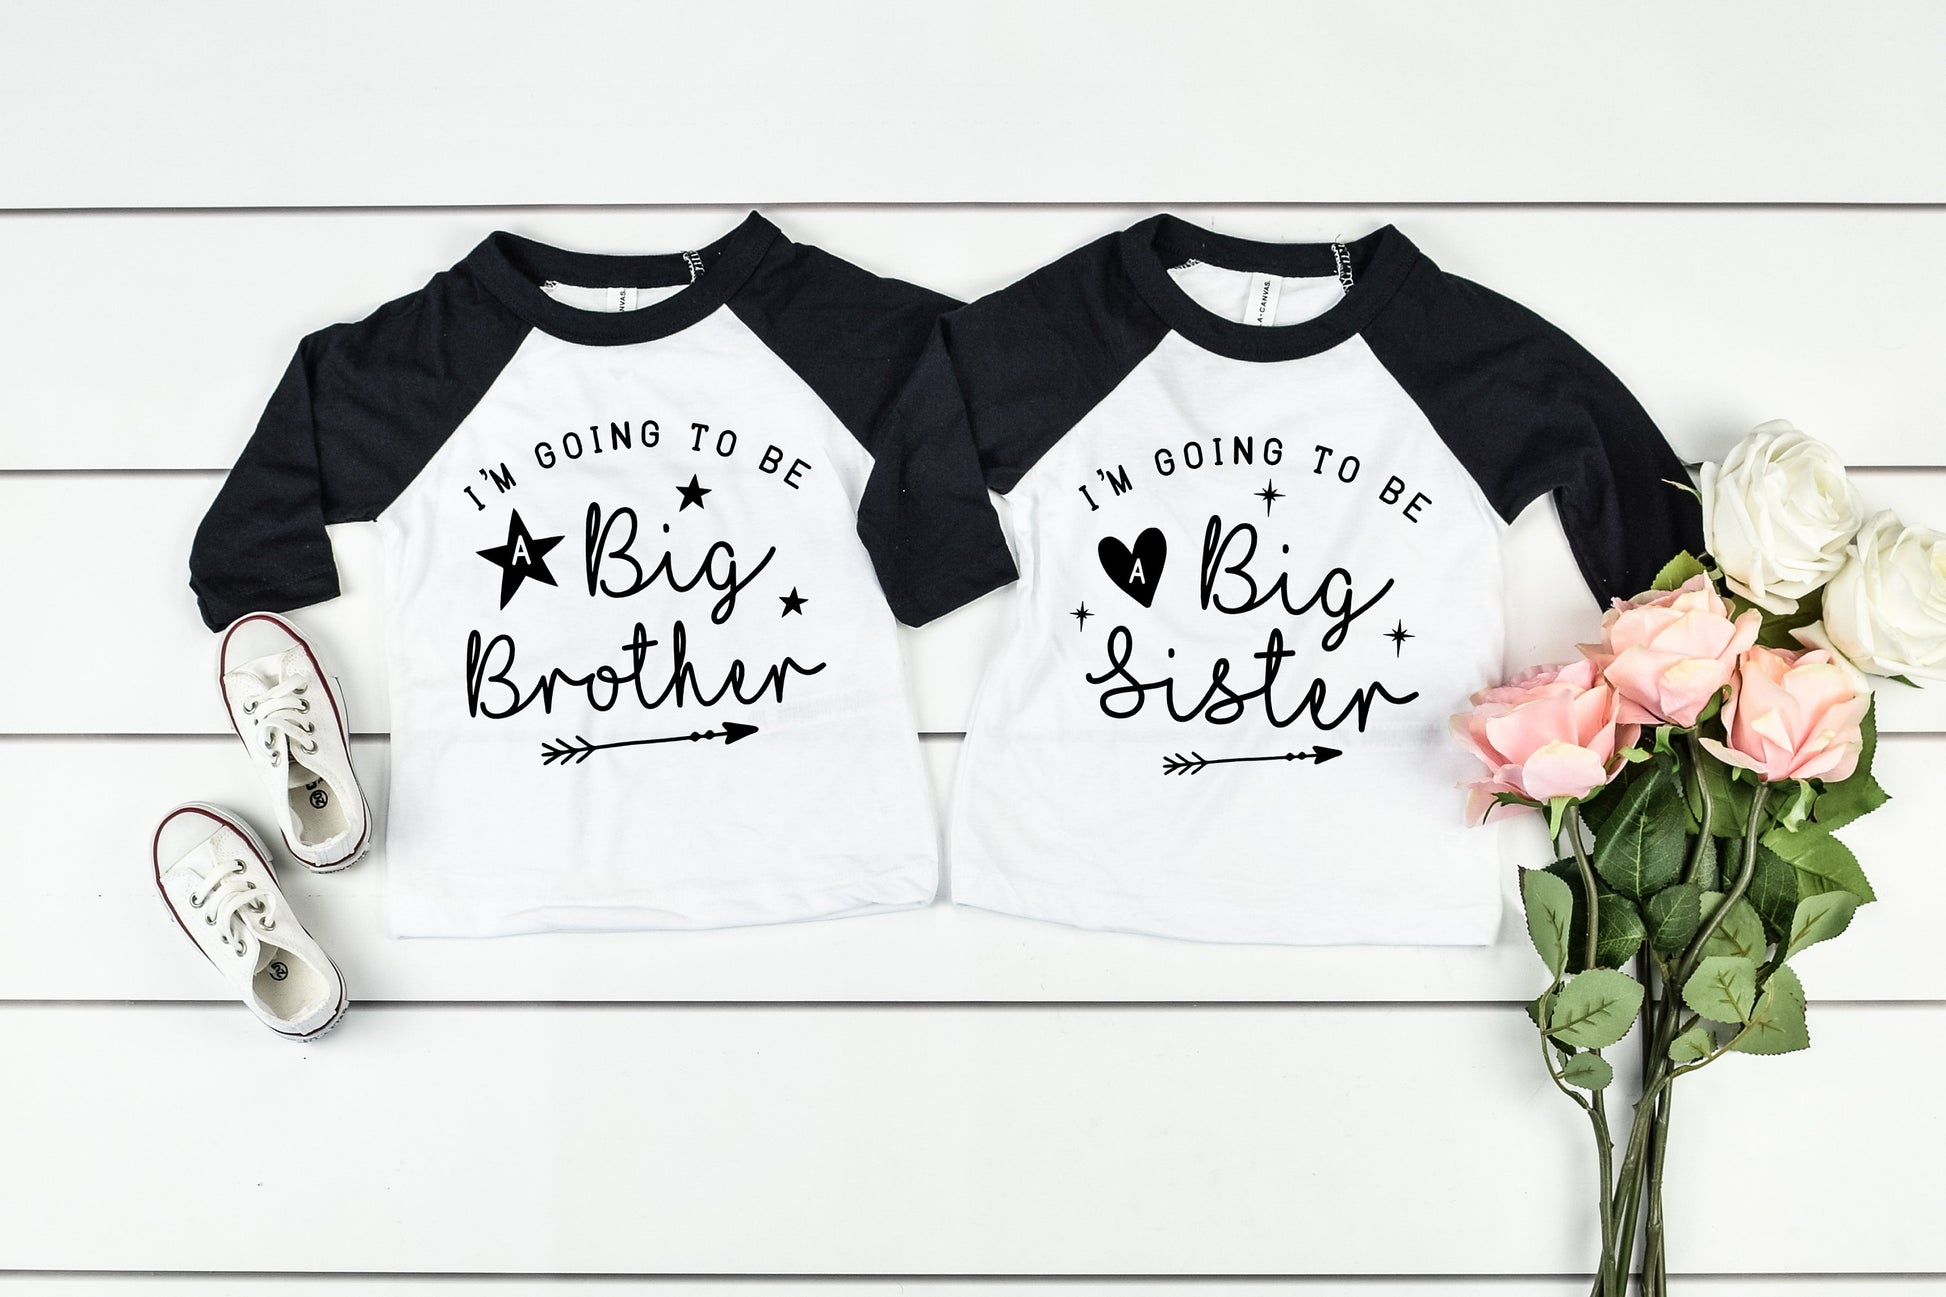 I'm Going to be a Big Brother Big Sister Infant, Toddler or Kids Raglan Tee - Pregnancy Announcement Shirt - Future Big Brother - Big Sister